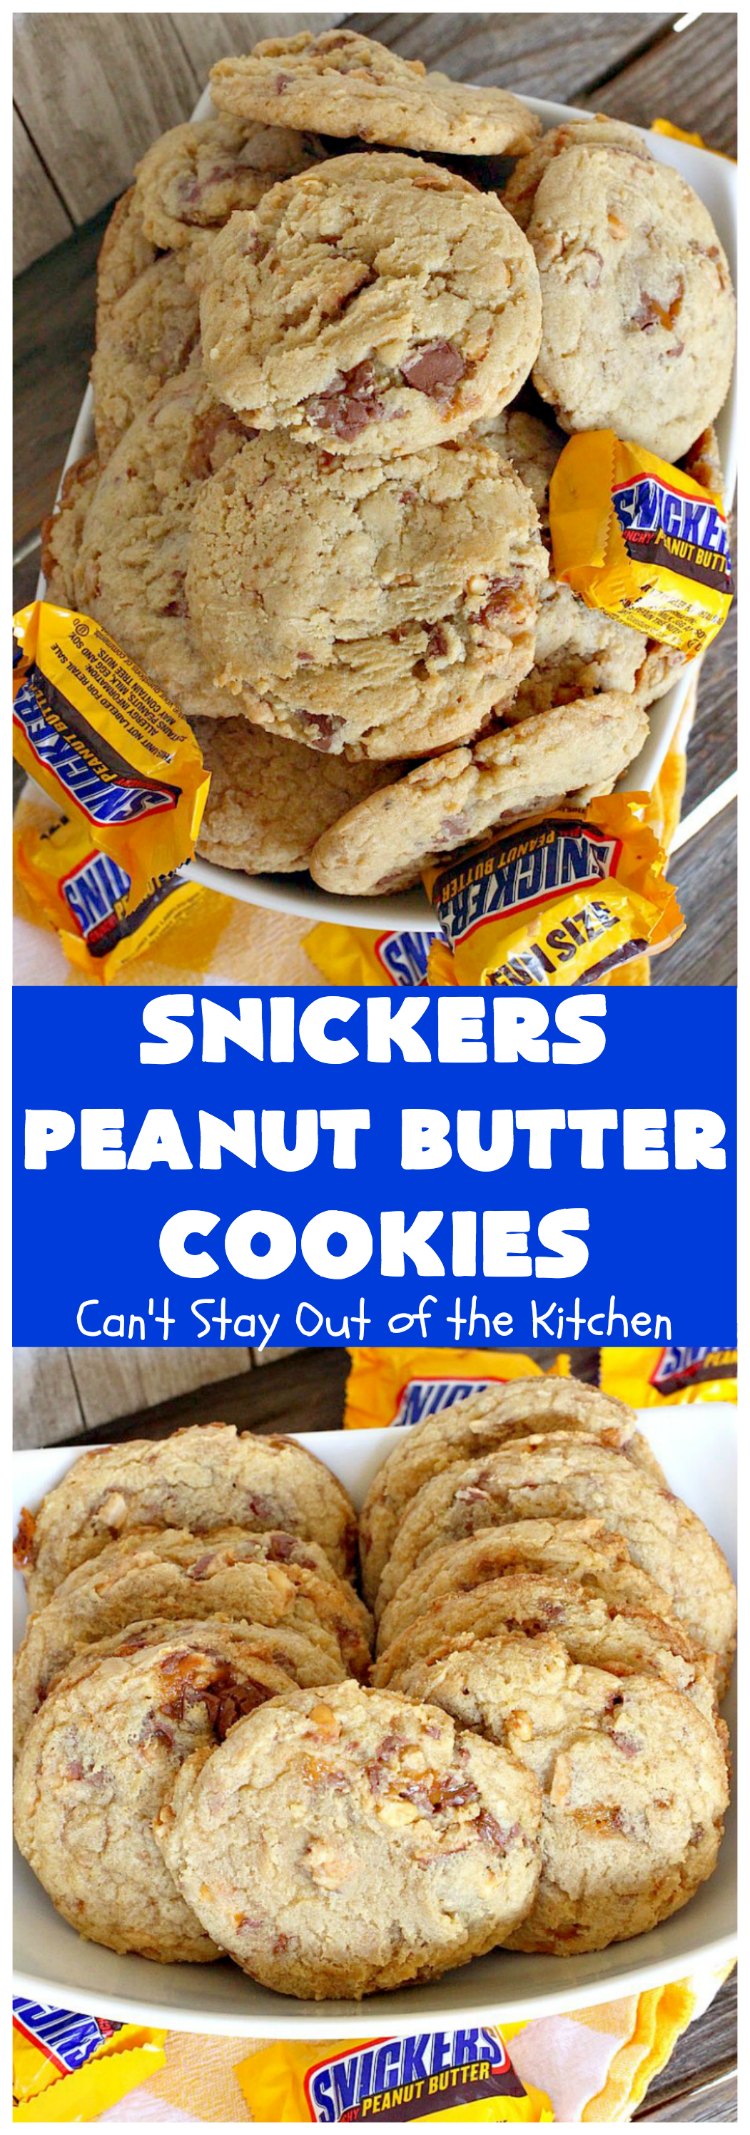 Snickers Peanut Butter Cookies | Can't Stay Out of the Kitchen